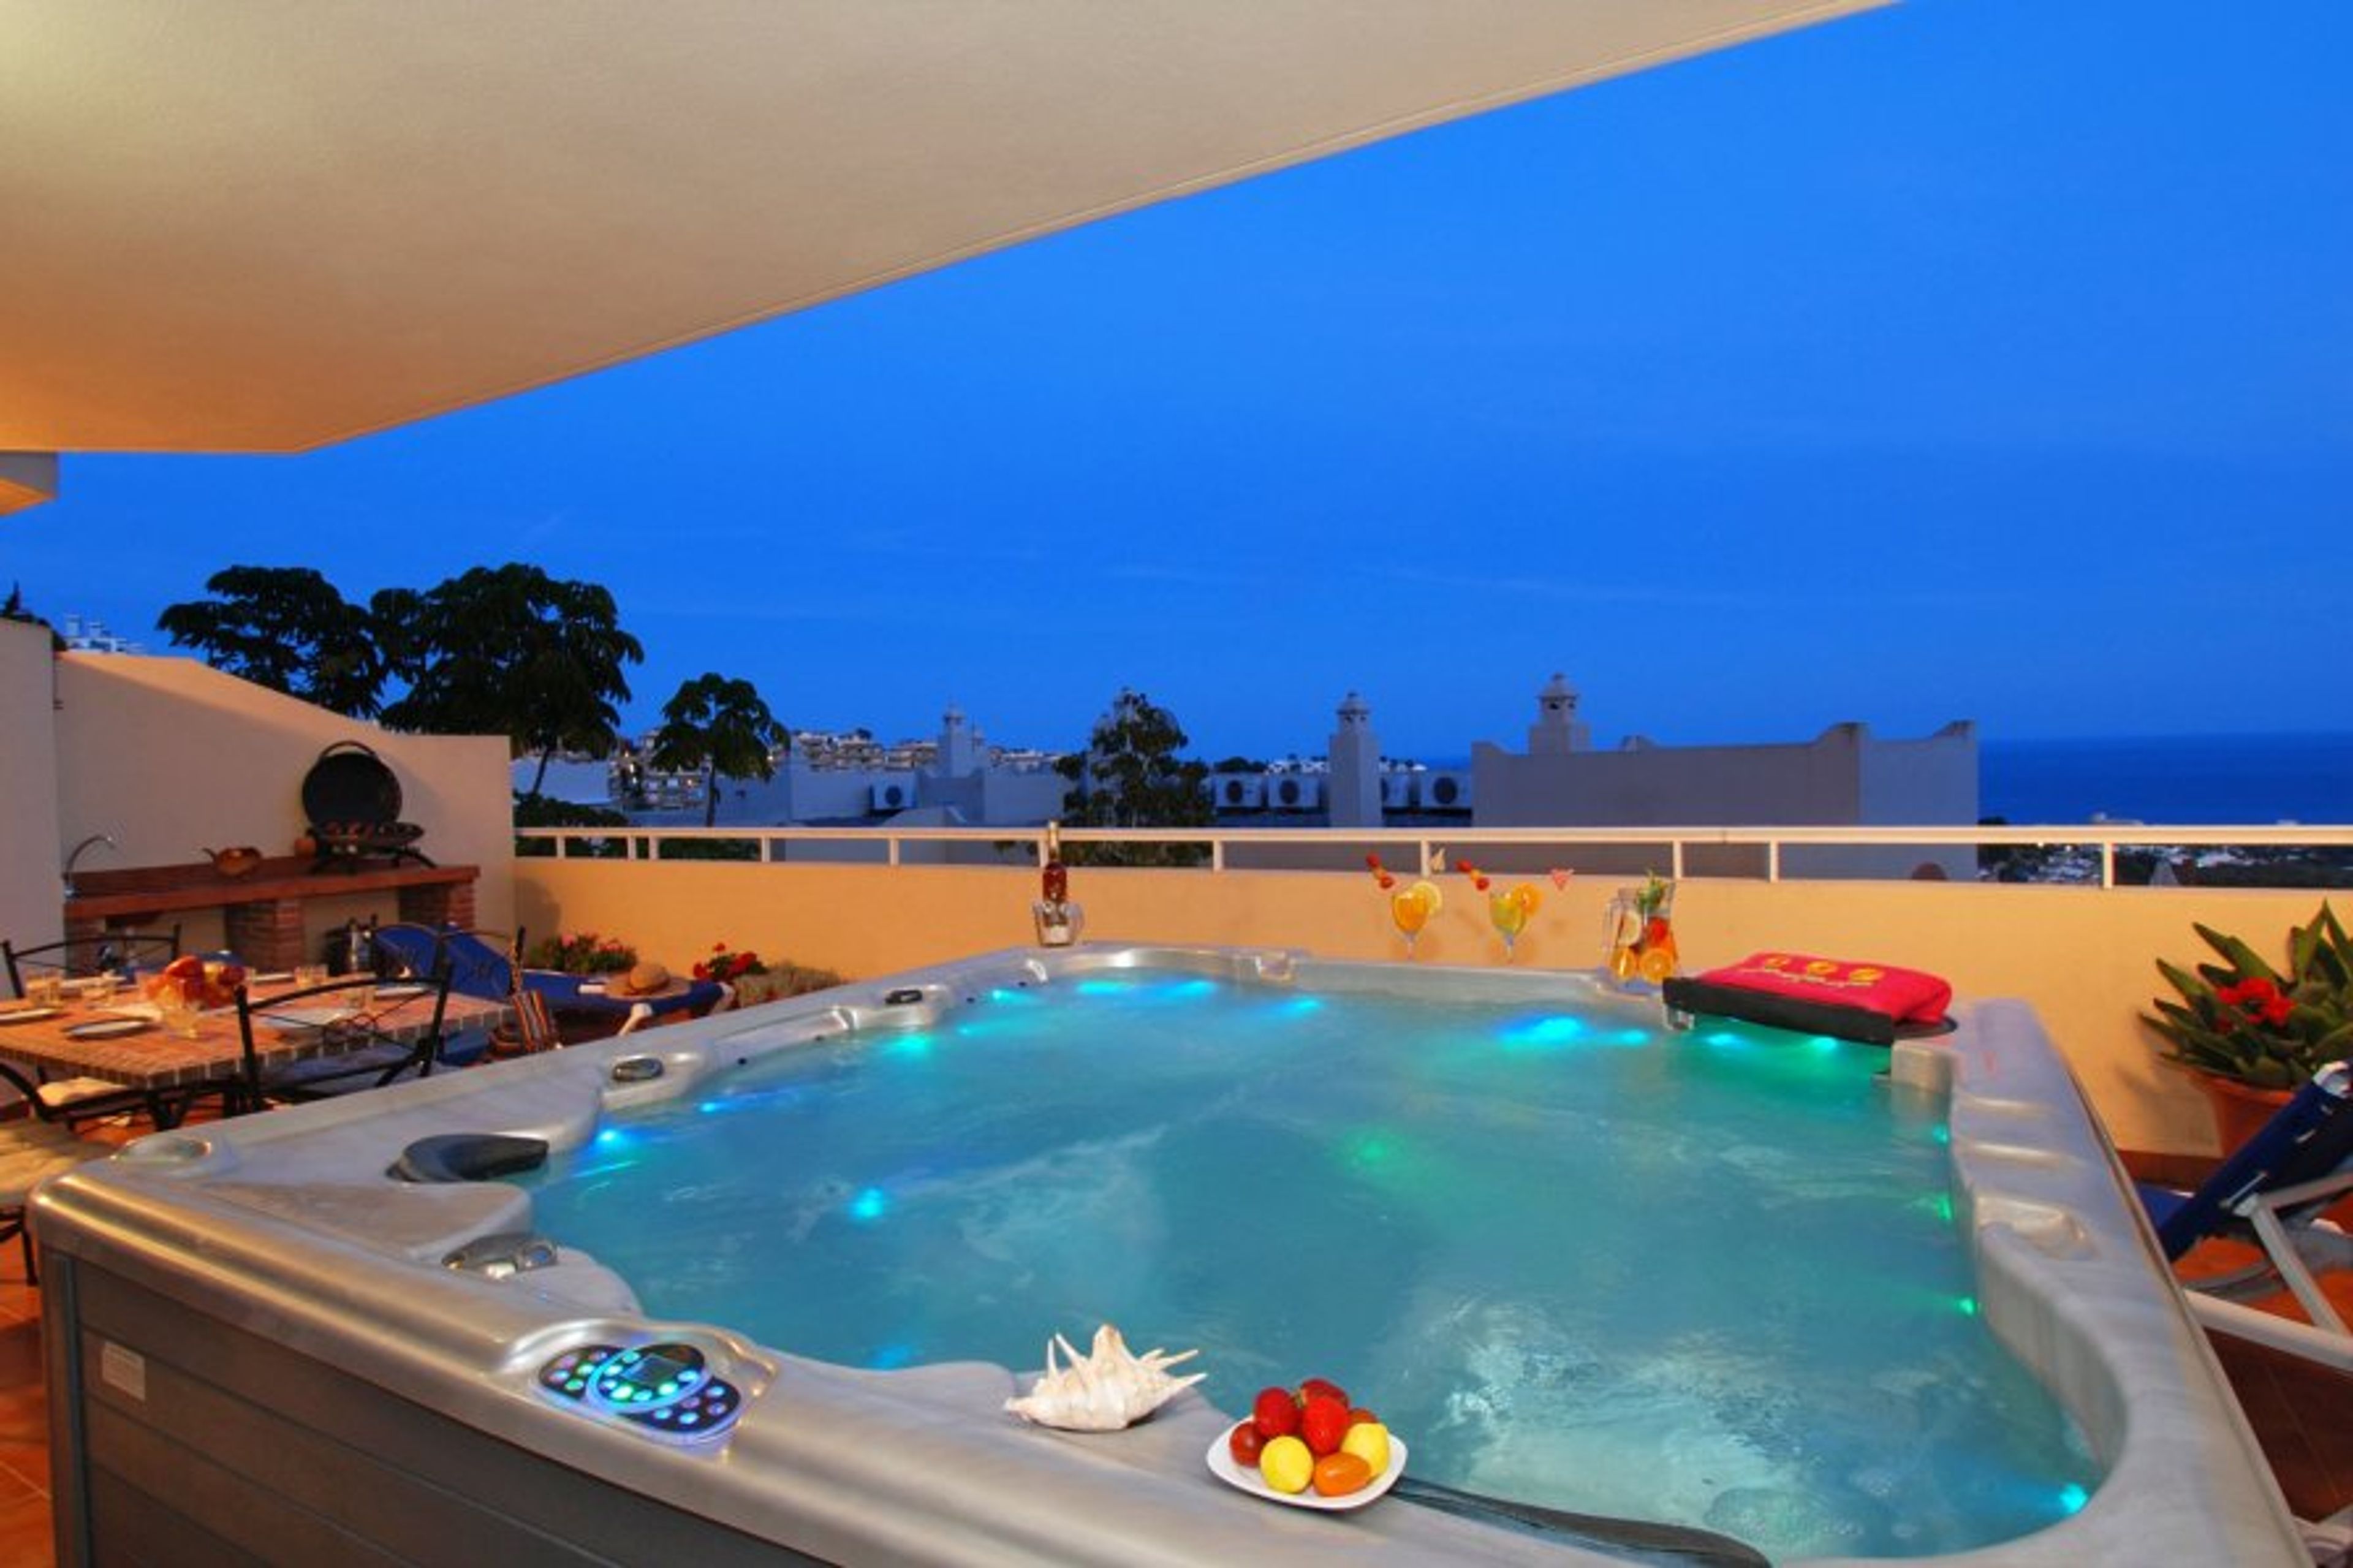 The jacuzzi at night!